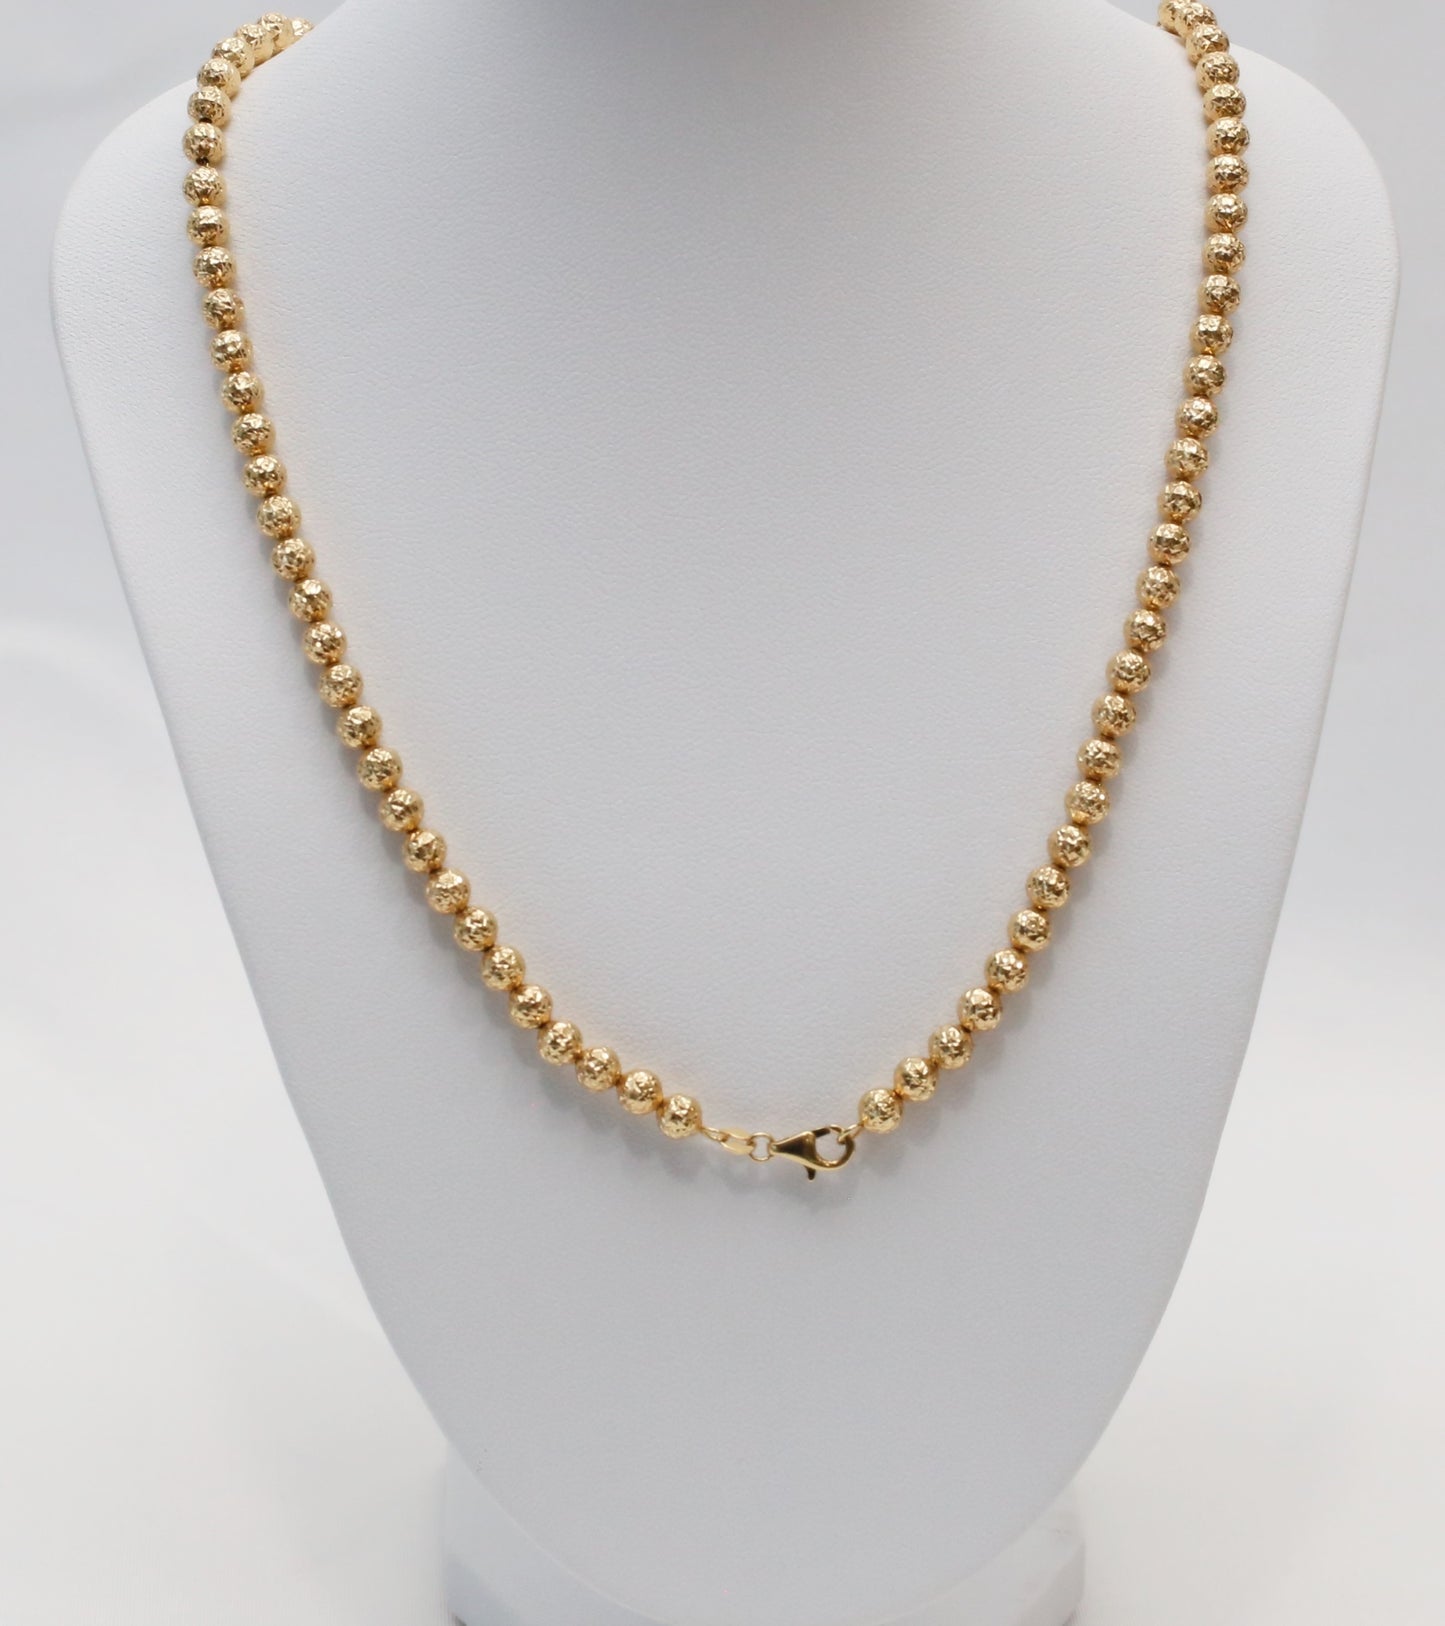 18k Yellow Gold Beaded Necklace, 18 inches - 12.1g